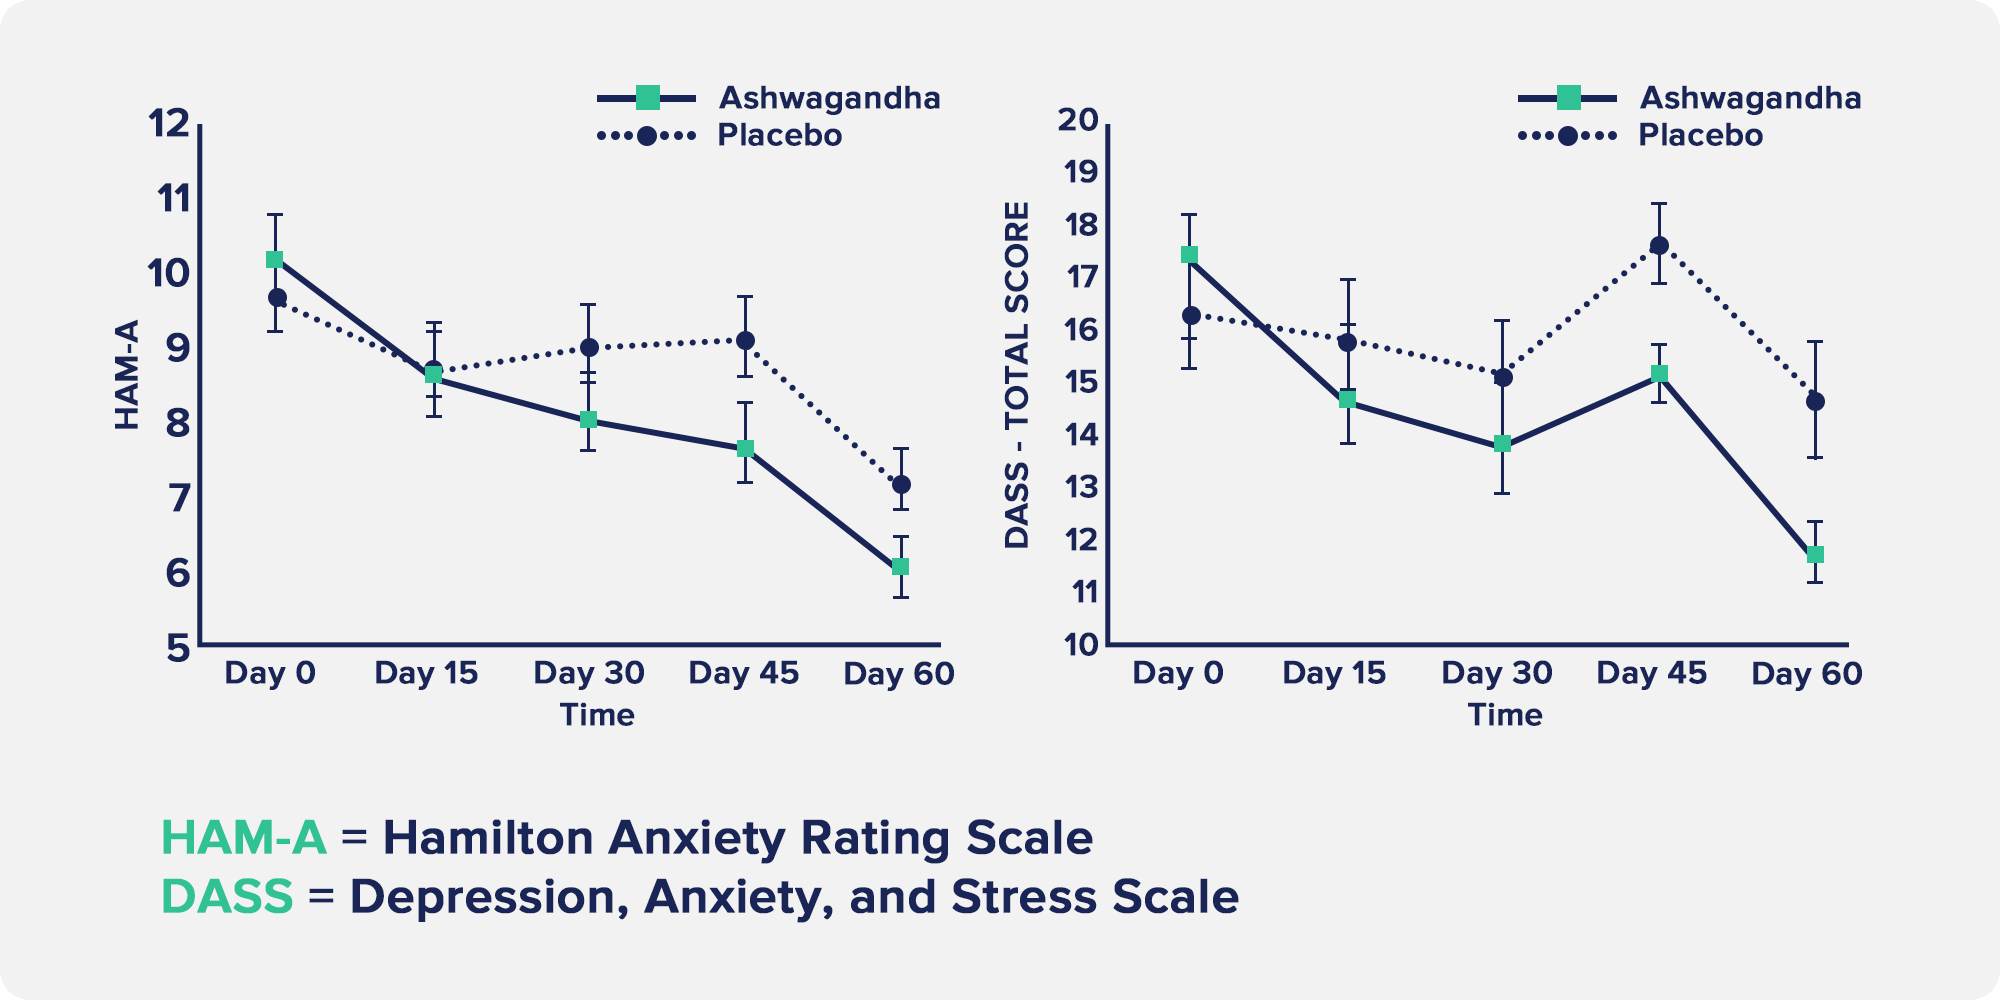 a graph showing ashwagandha versus placebo for improving anxiety, depression, and stress